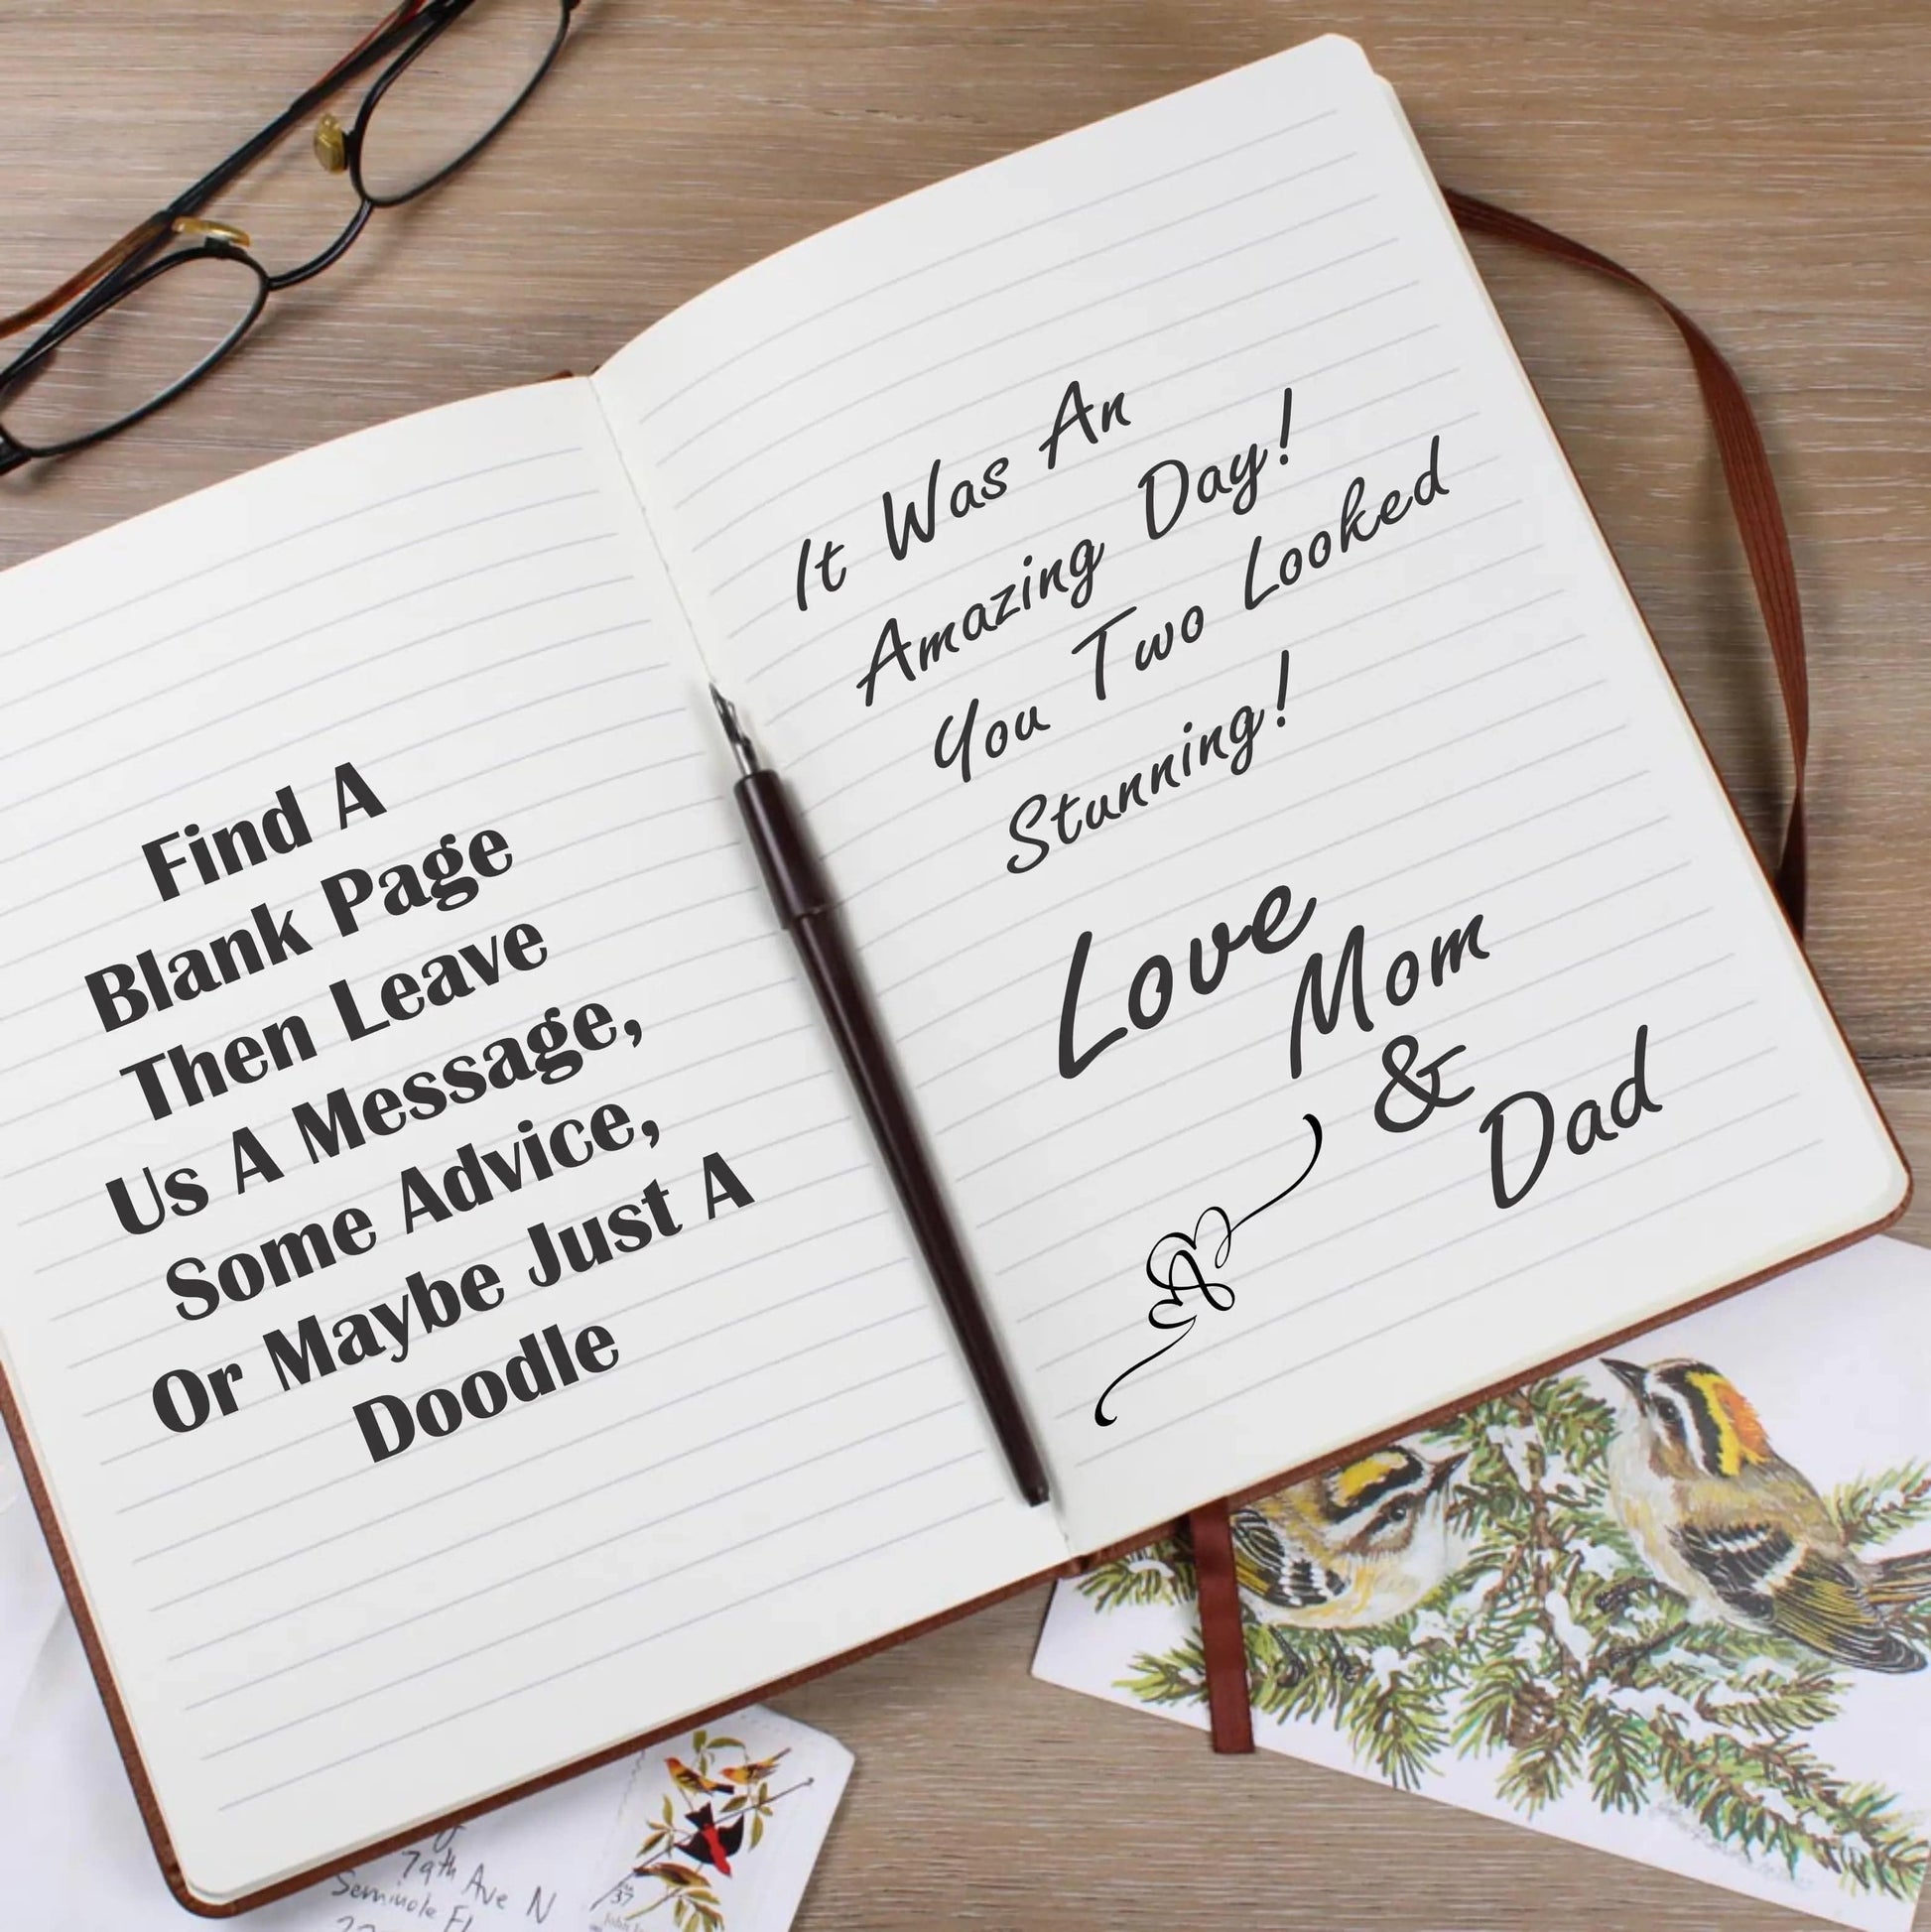 A Great Gift - Personalized Wedding Guest Book - Gifts From The Heart